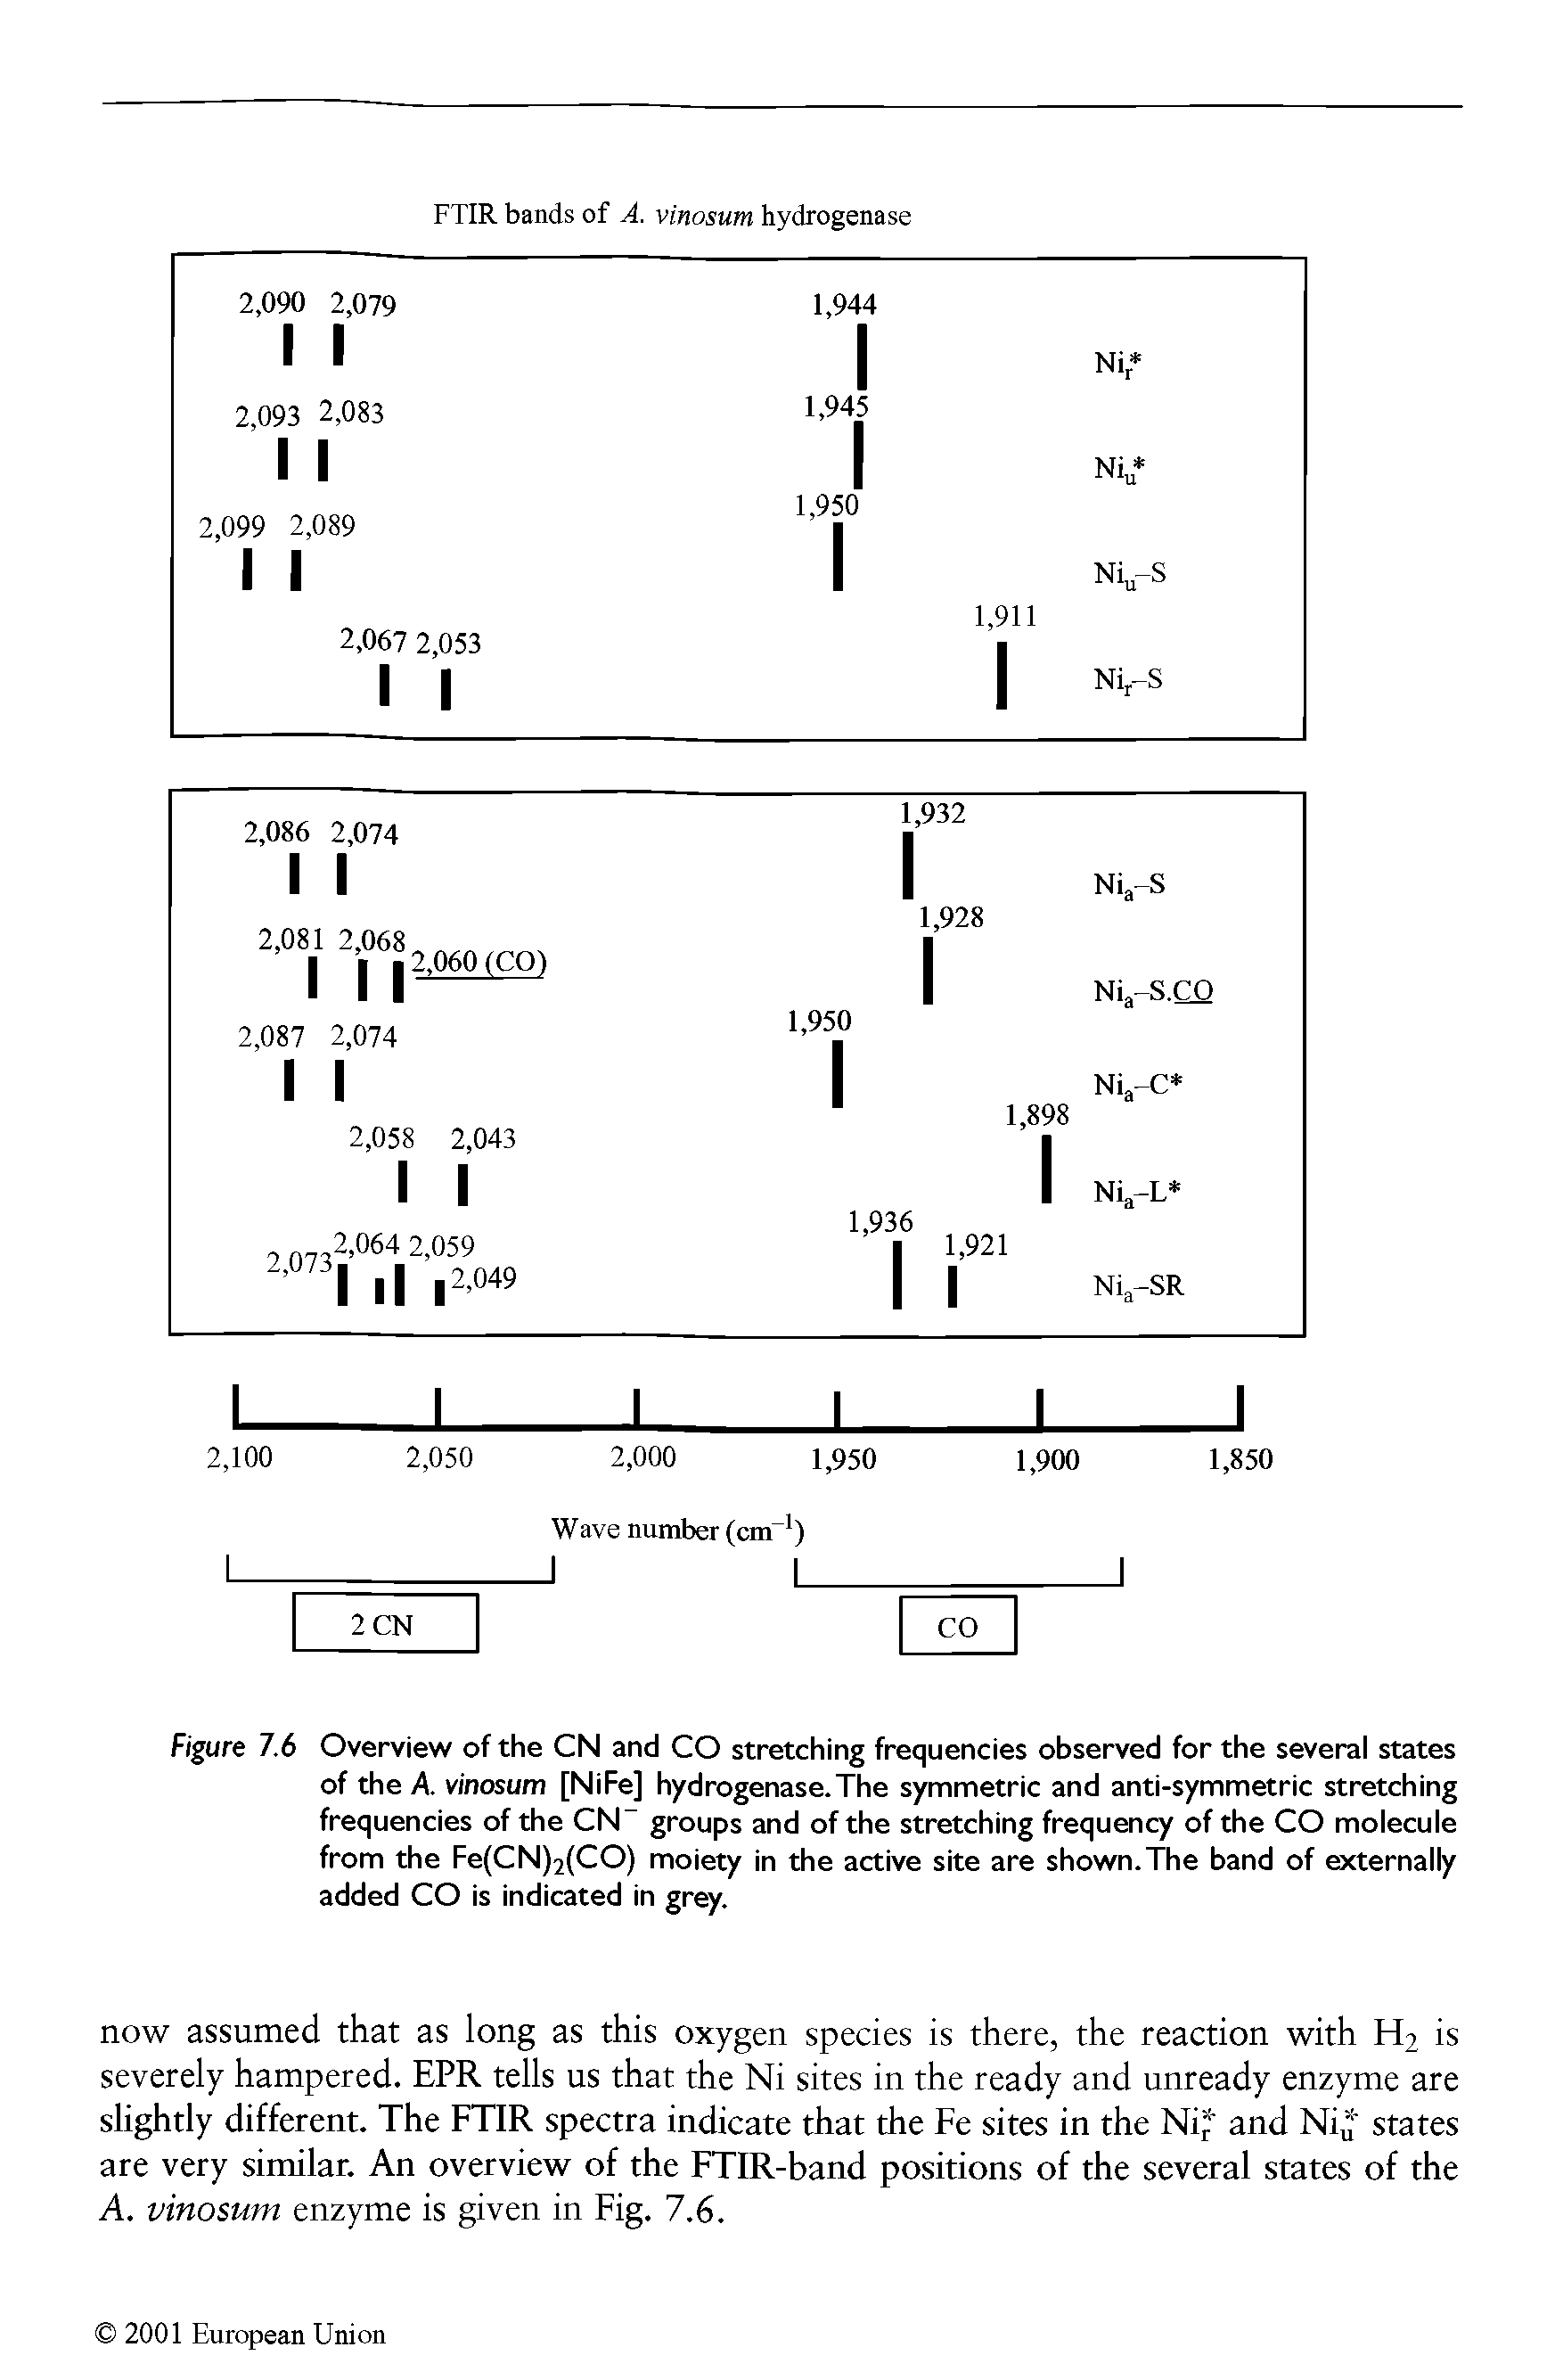 Figure 7.6 Overview of the CN and CO stretching frequencies observed for the several states of the A. vinosum [NiFe] hydrogenase.The symmetric and anti-symmetric stretching frequencies of the CN groups and of the stretching frequency of the CO molecule from the Fe(CN)2(CO) moiety in the active site are shown.The band of externally added CO is indicated in grey.